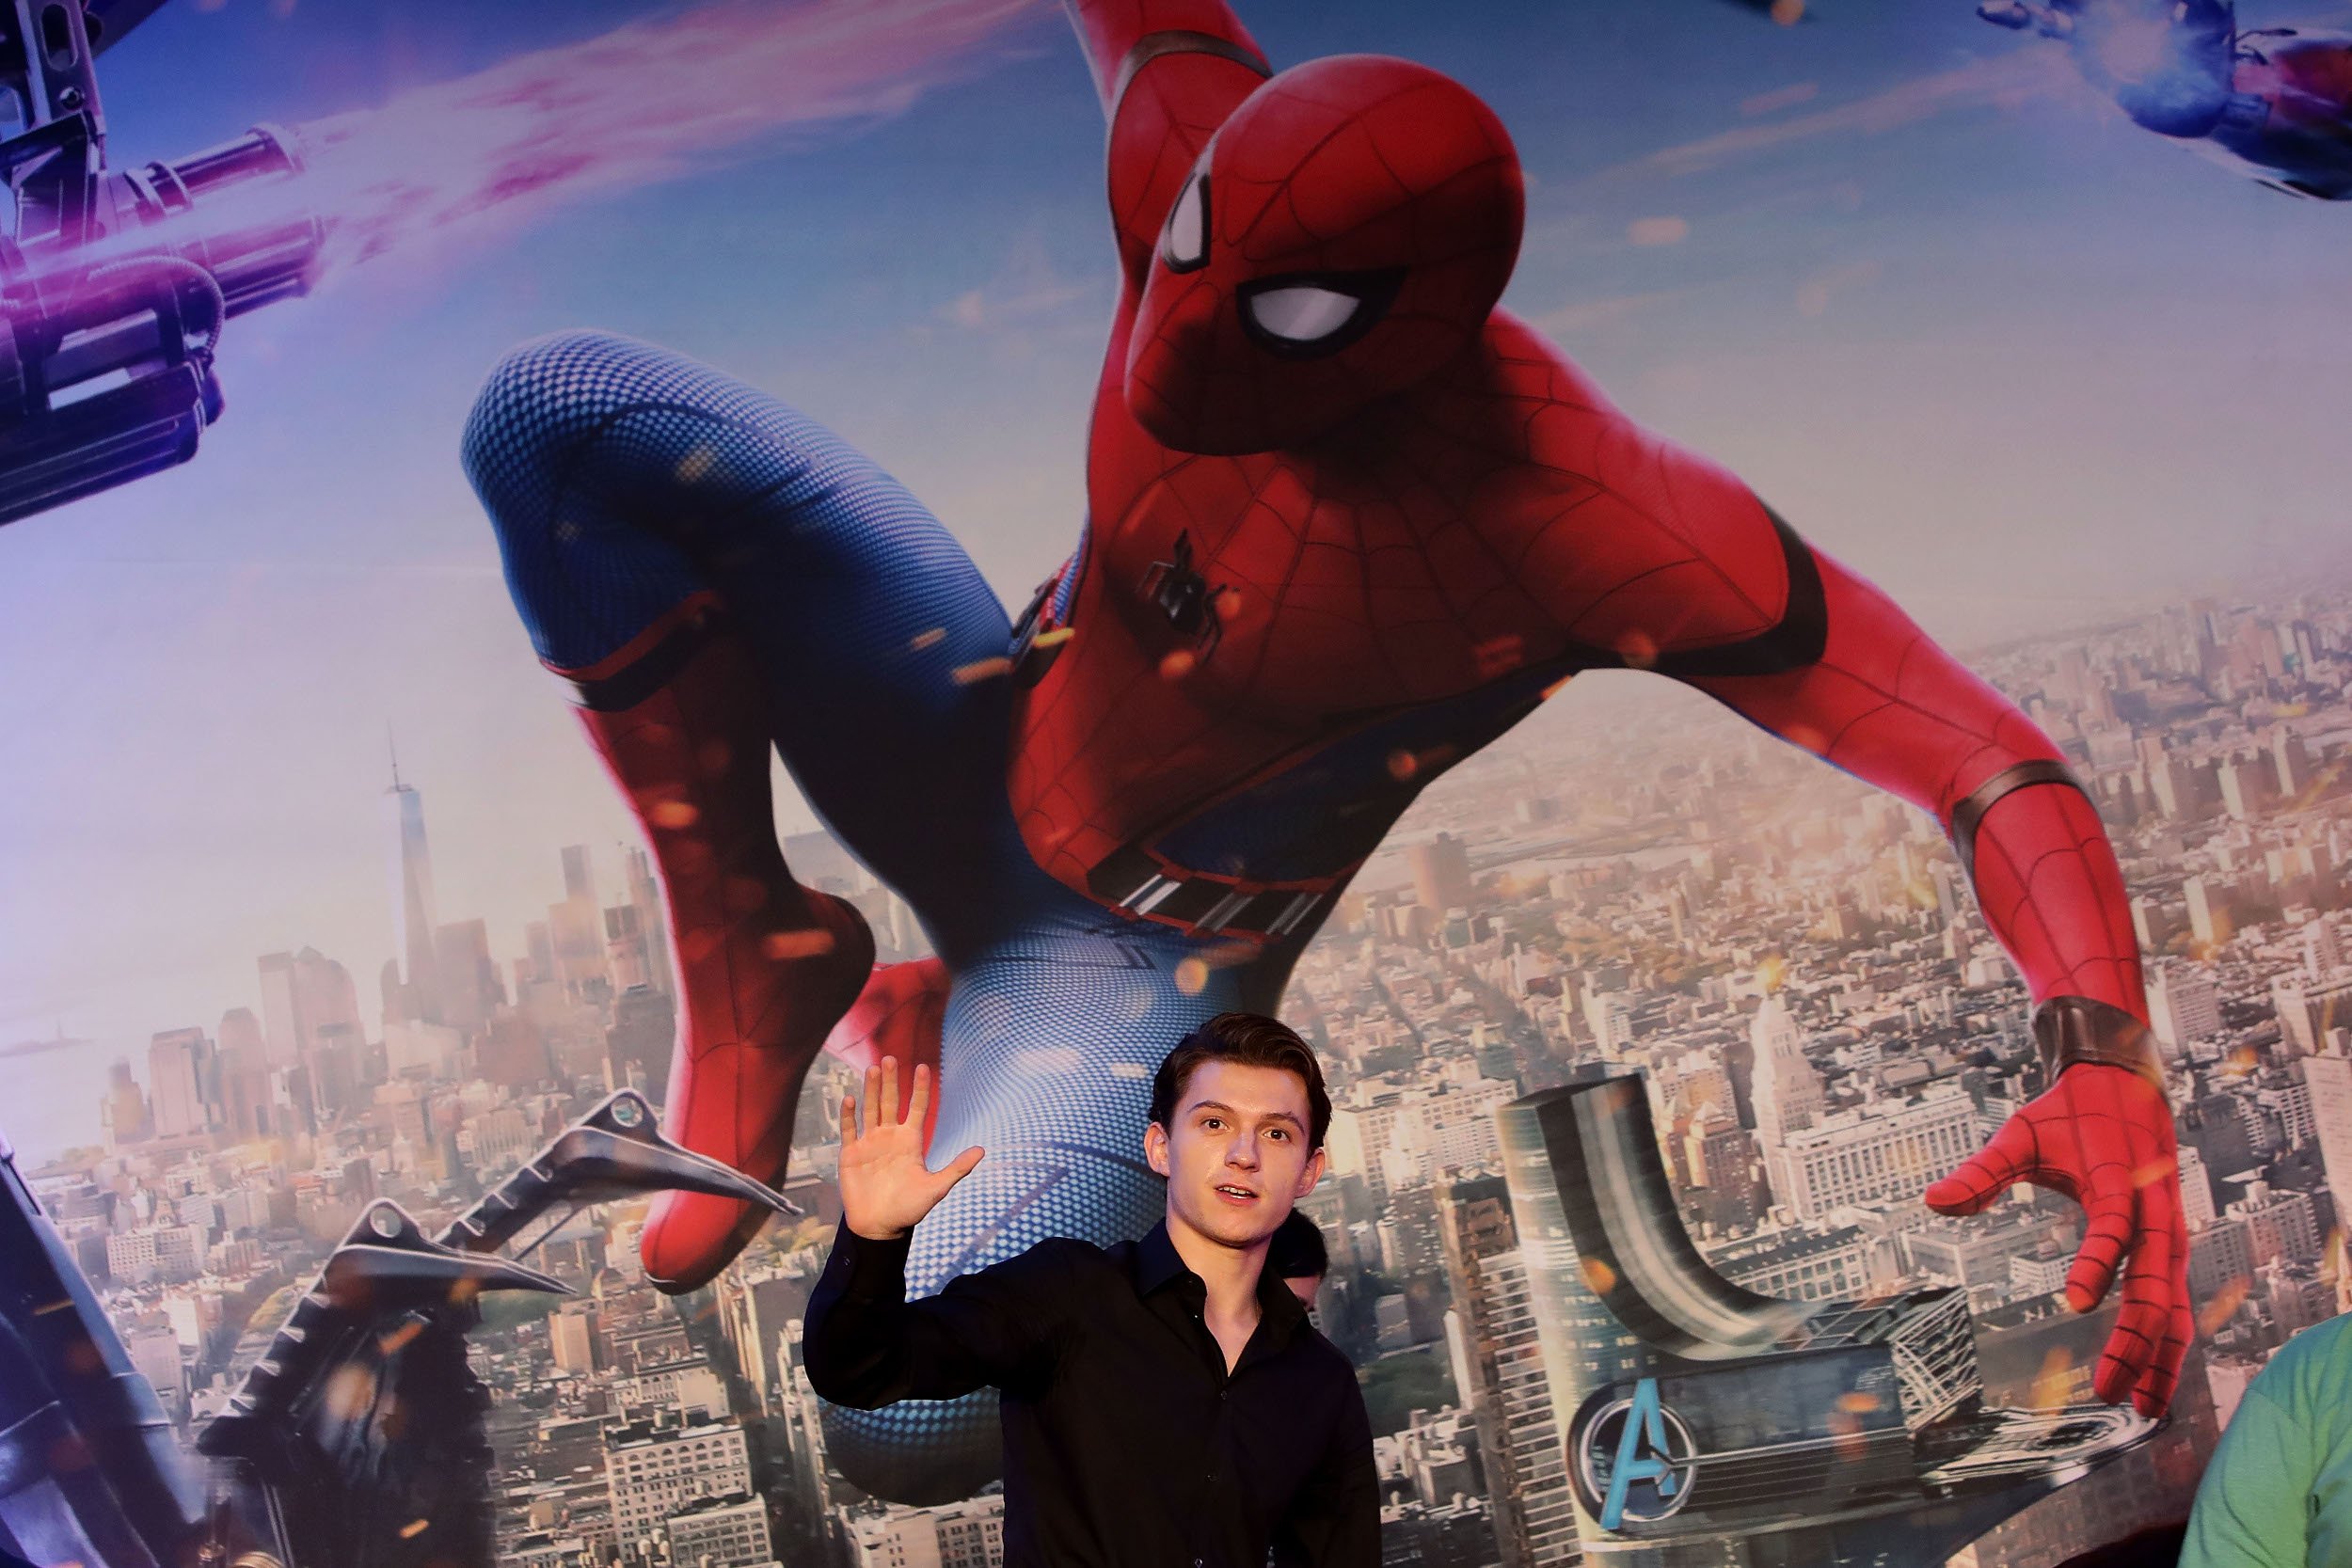 'Spider-Man: No Way Home' star Tom Holland standing beneath a Spider-Man image and waving